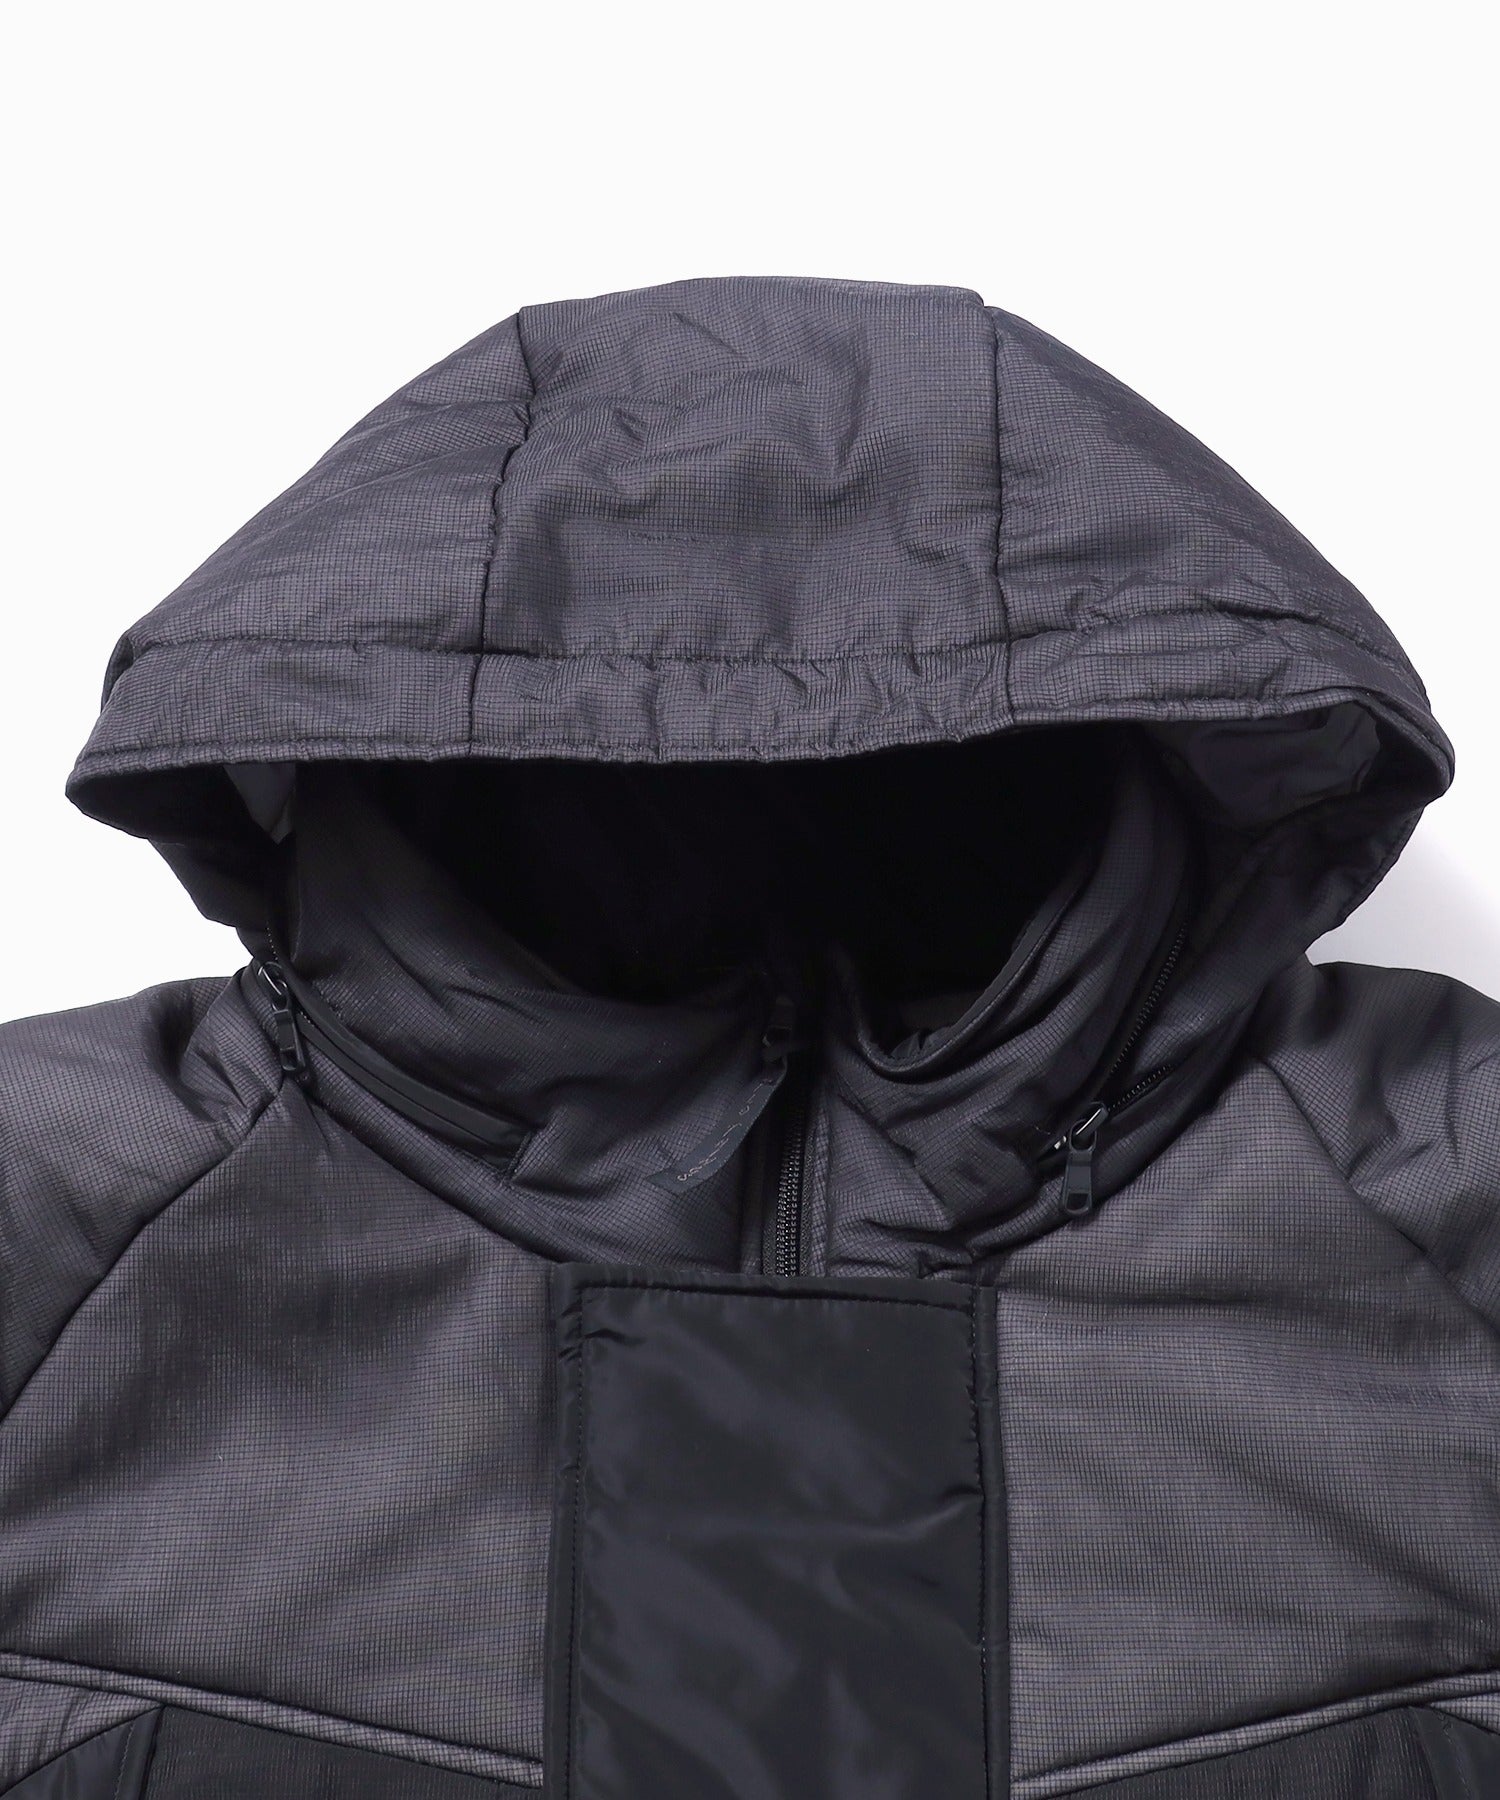 PRIMALOFT MONSTER PARKA by WILD THINGS